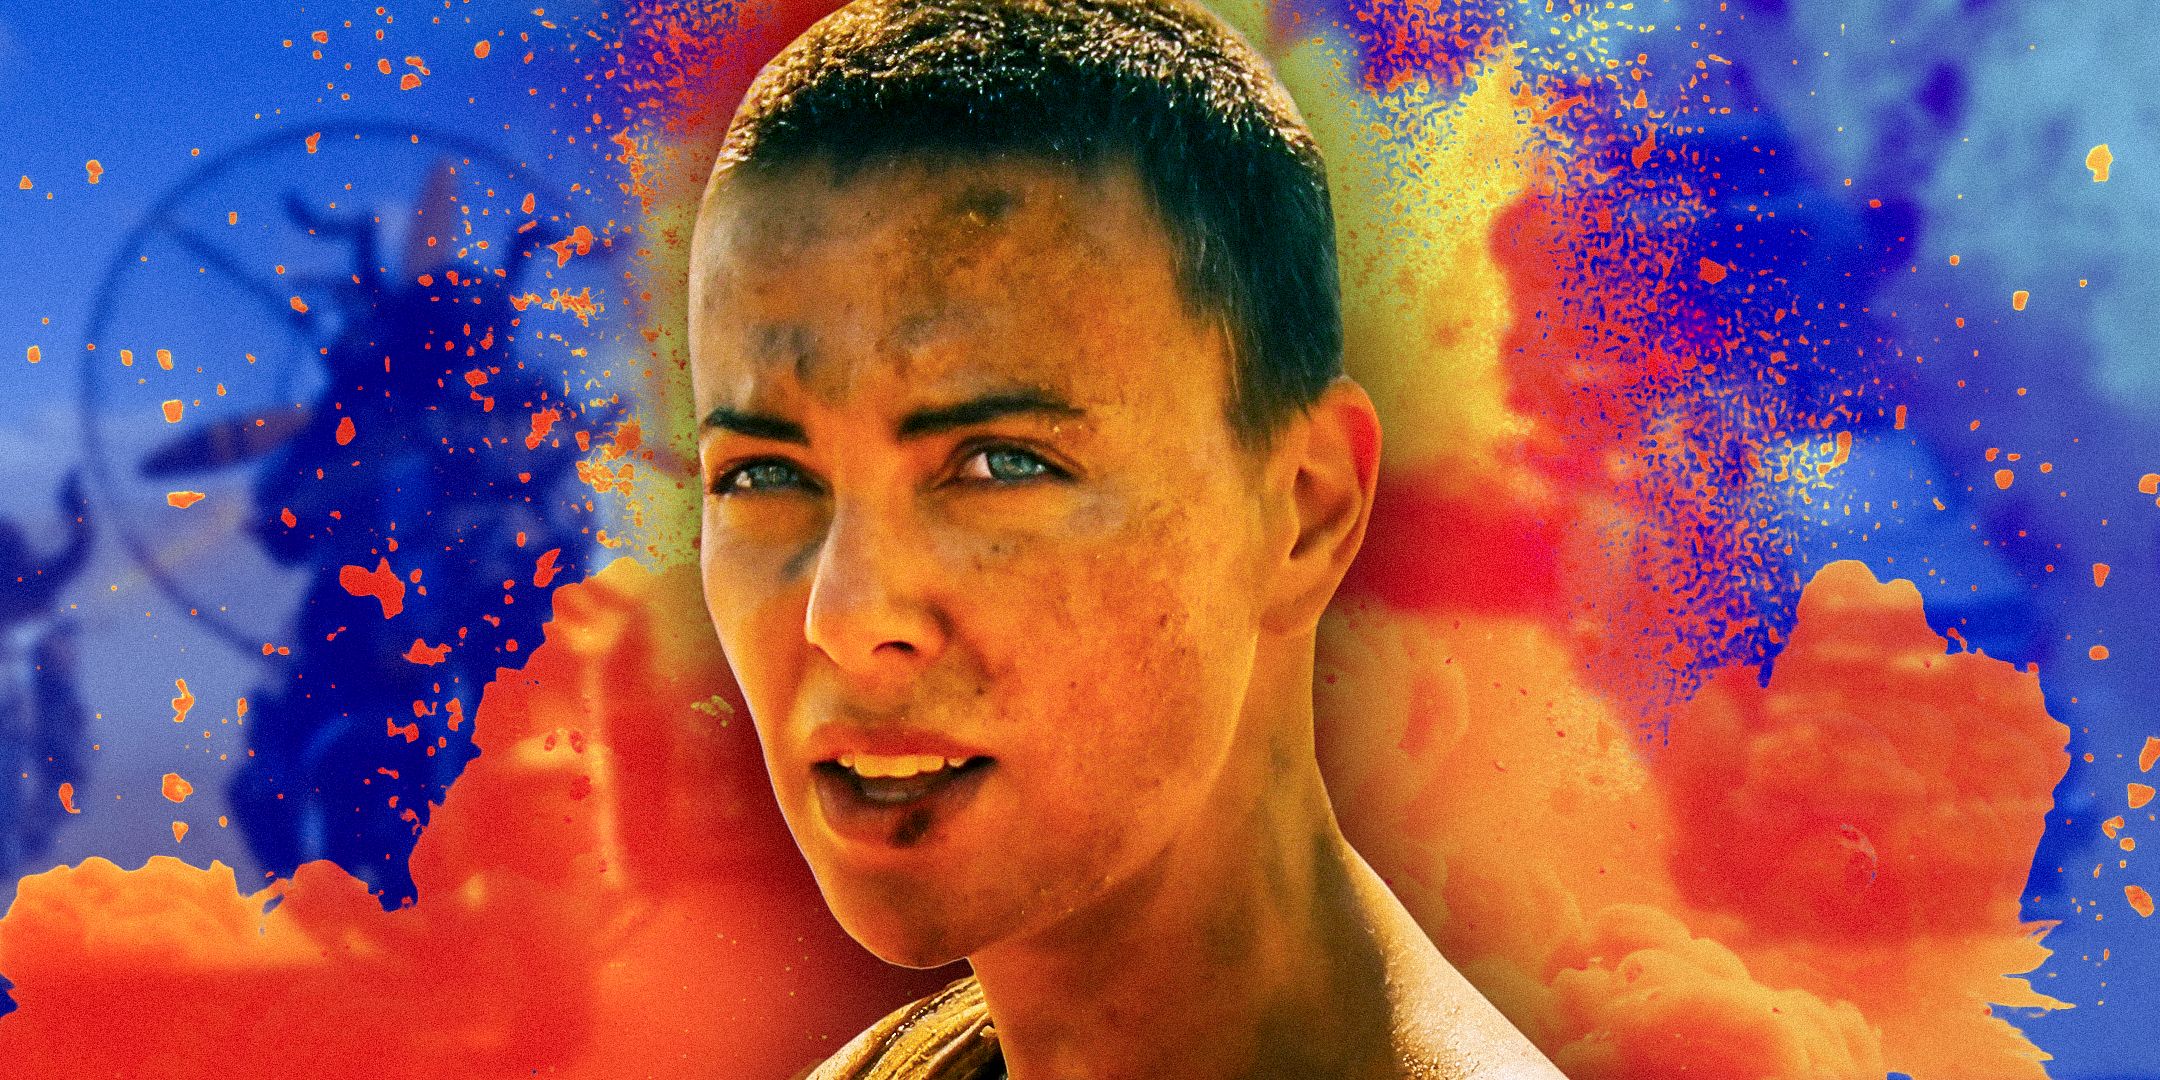 (Charlize-Theron-as-Imperator-Furiosa)-from-Mad-Max-Fury-Road